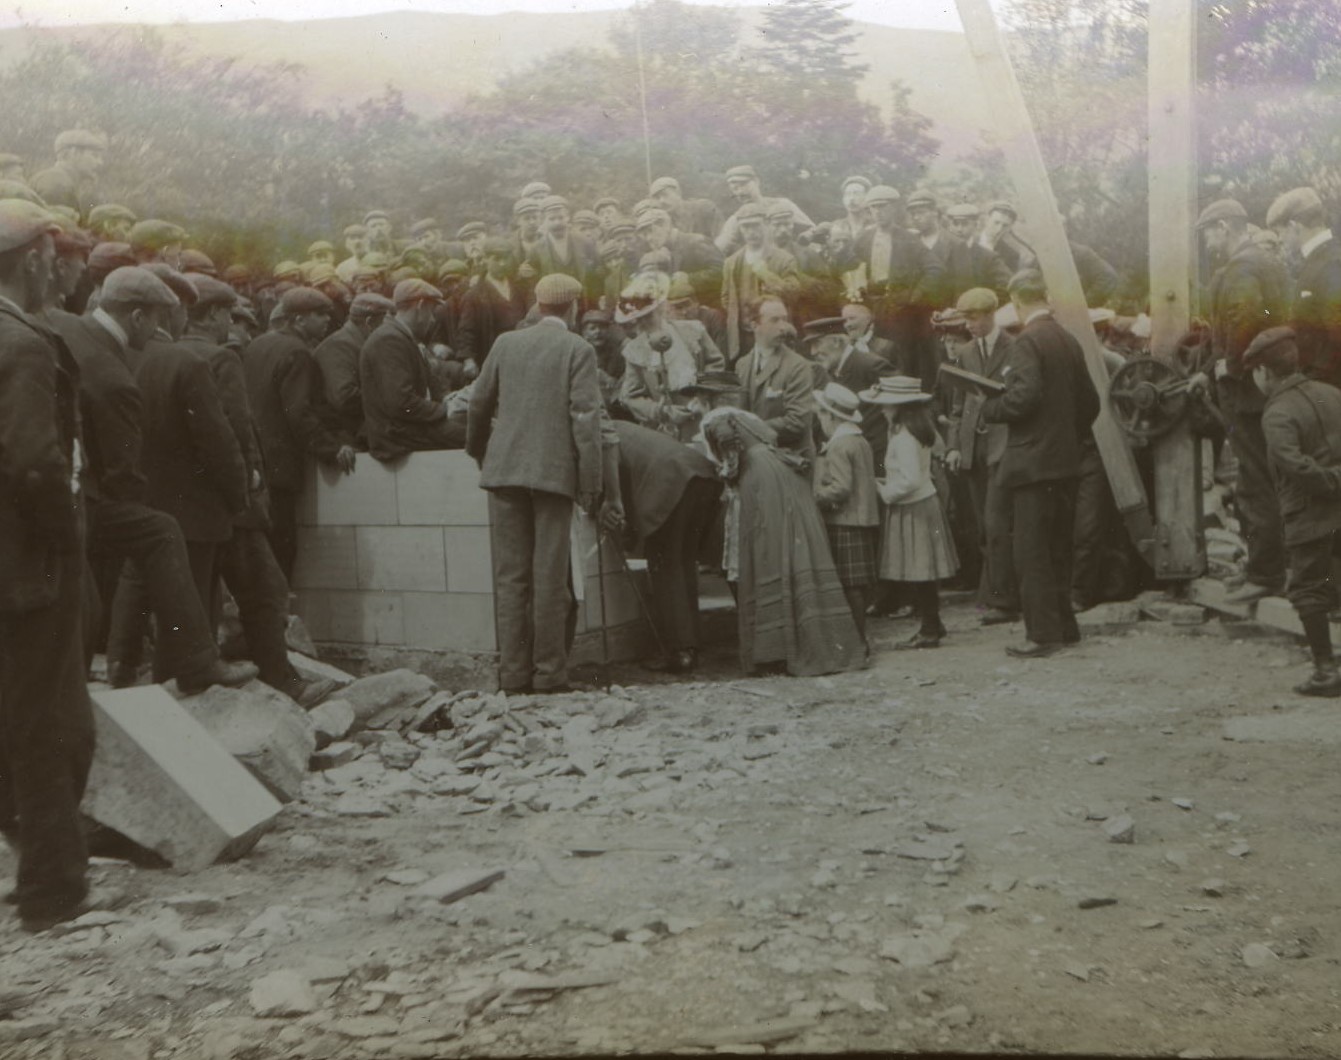 Laying the foundation stone for Ardkinglas